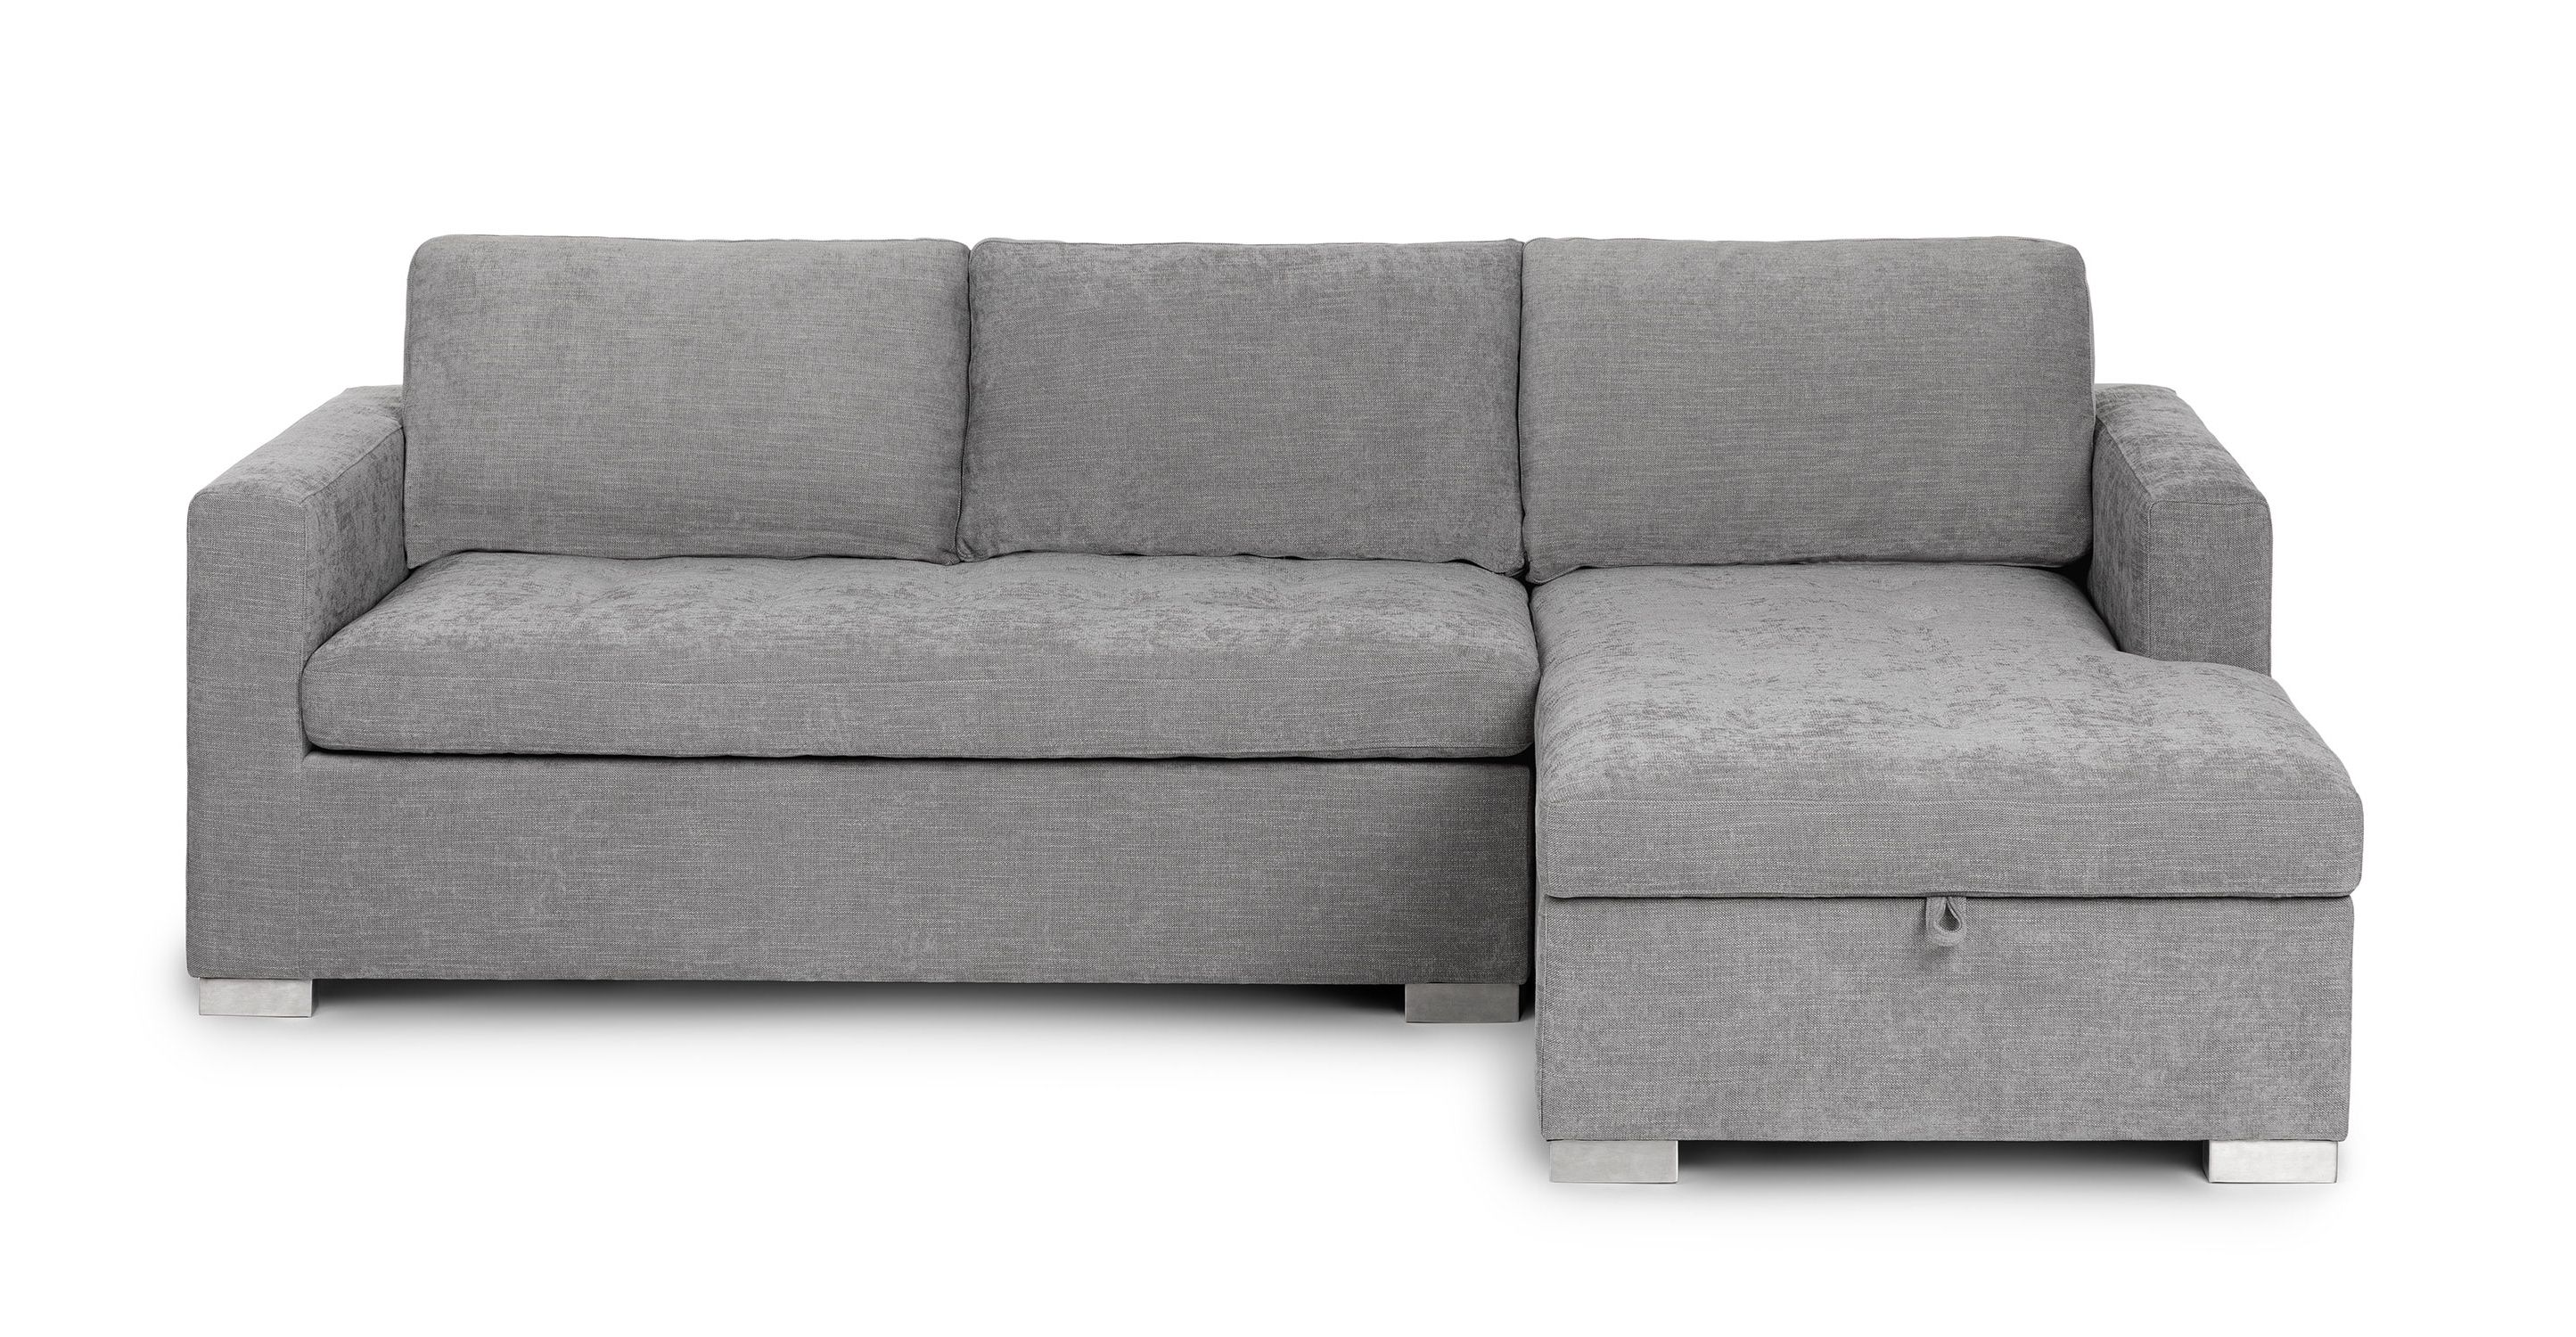 Right Facing Dawn Gray Fabric Sectional Sofa Bed | Soma | Article Within Sofa Beds With Right Chaise And Pillows (View 14 of 15)